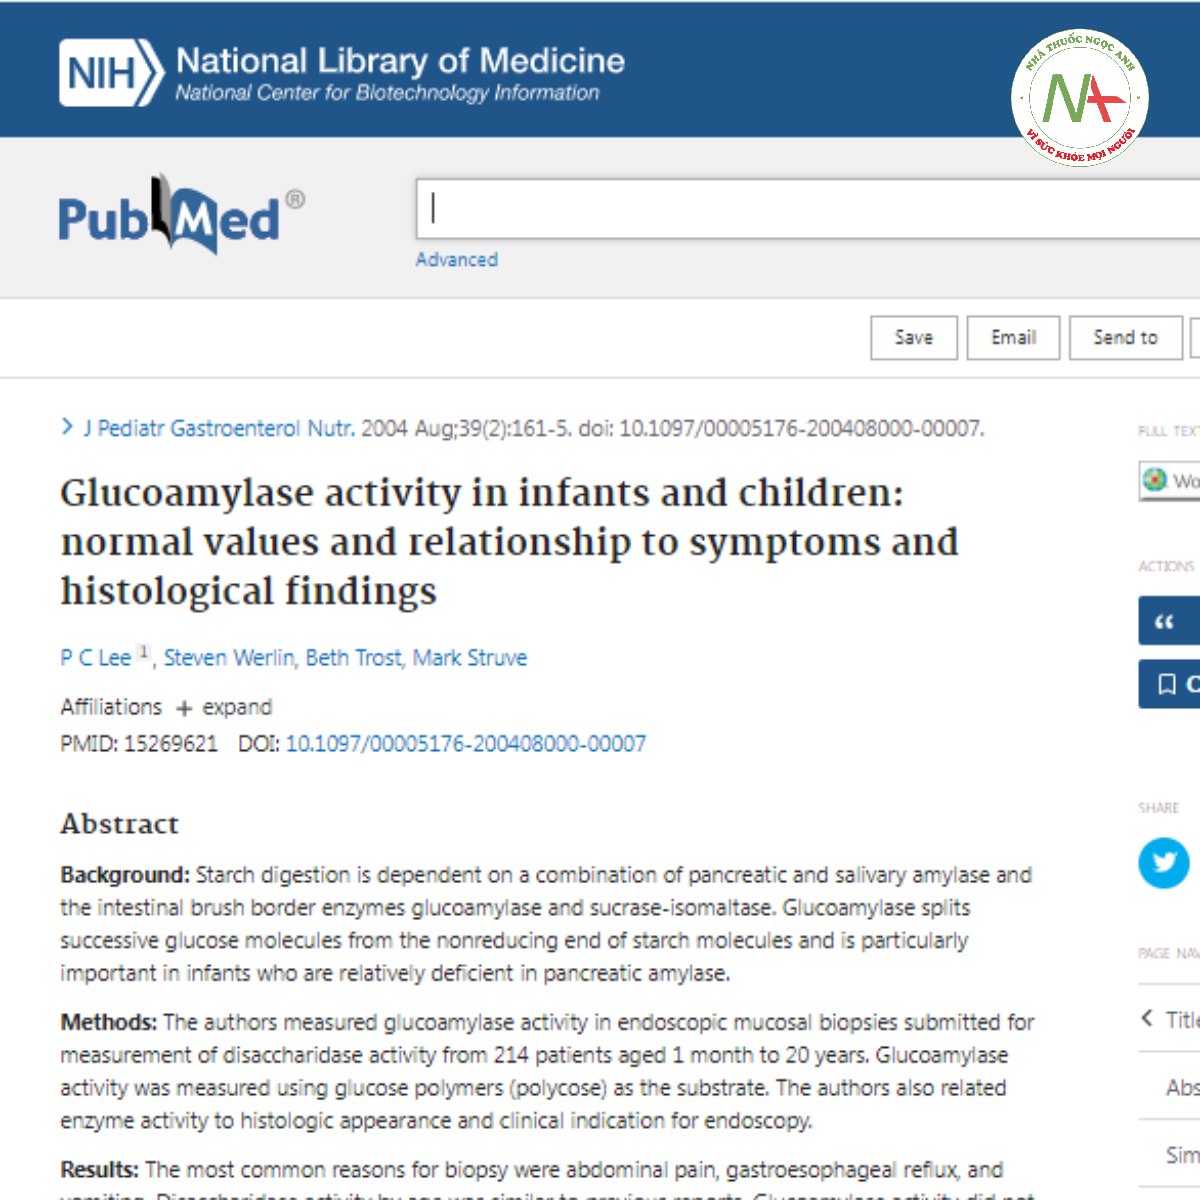 Glucoamylase activity in infants and children_ normal values and relationship to symptoms and histological findings